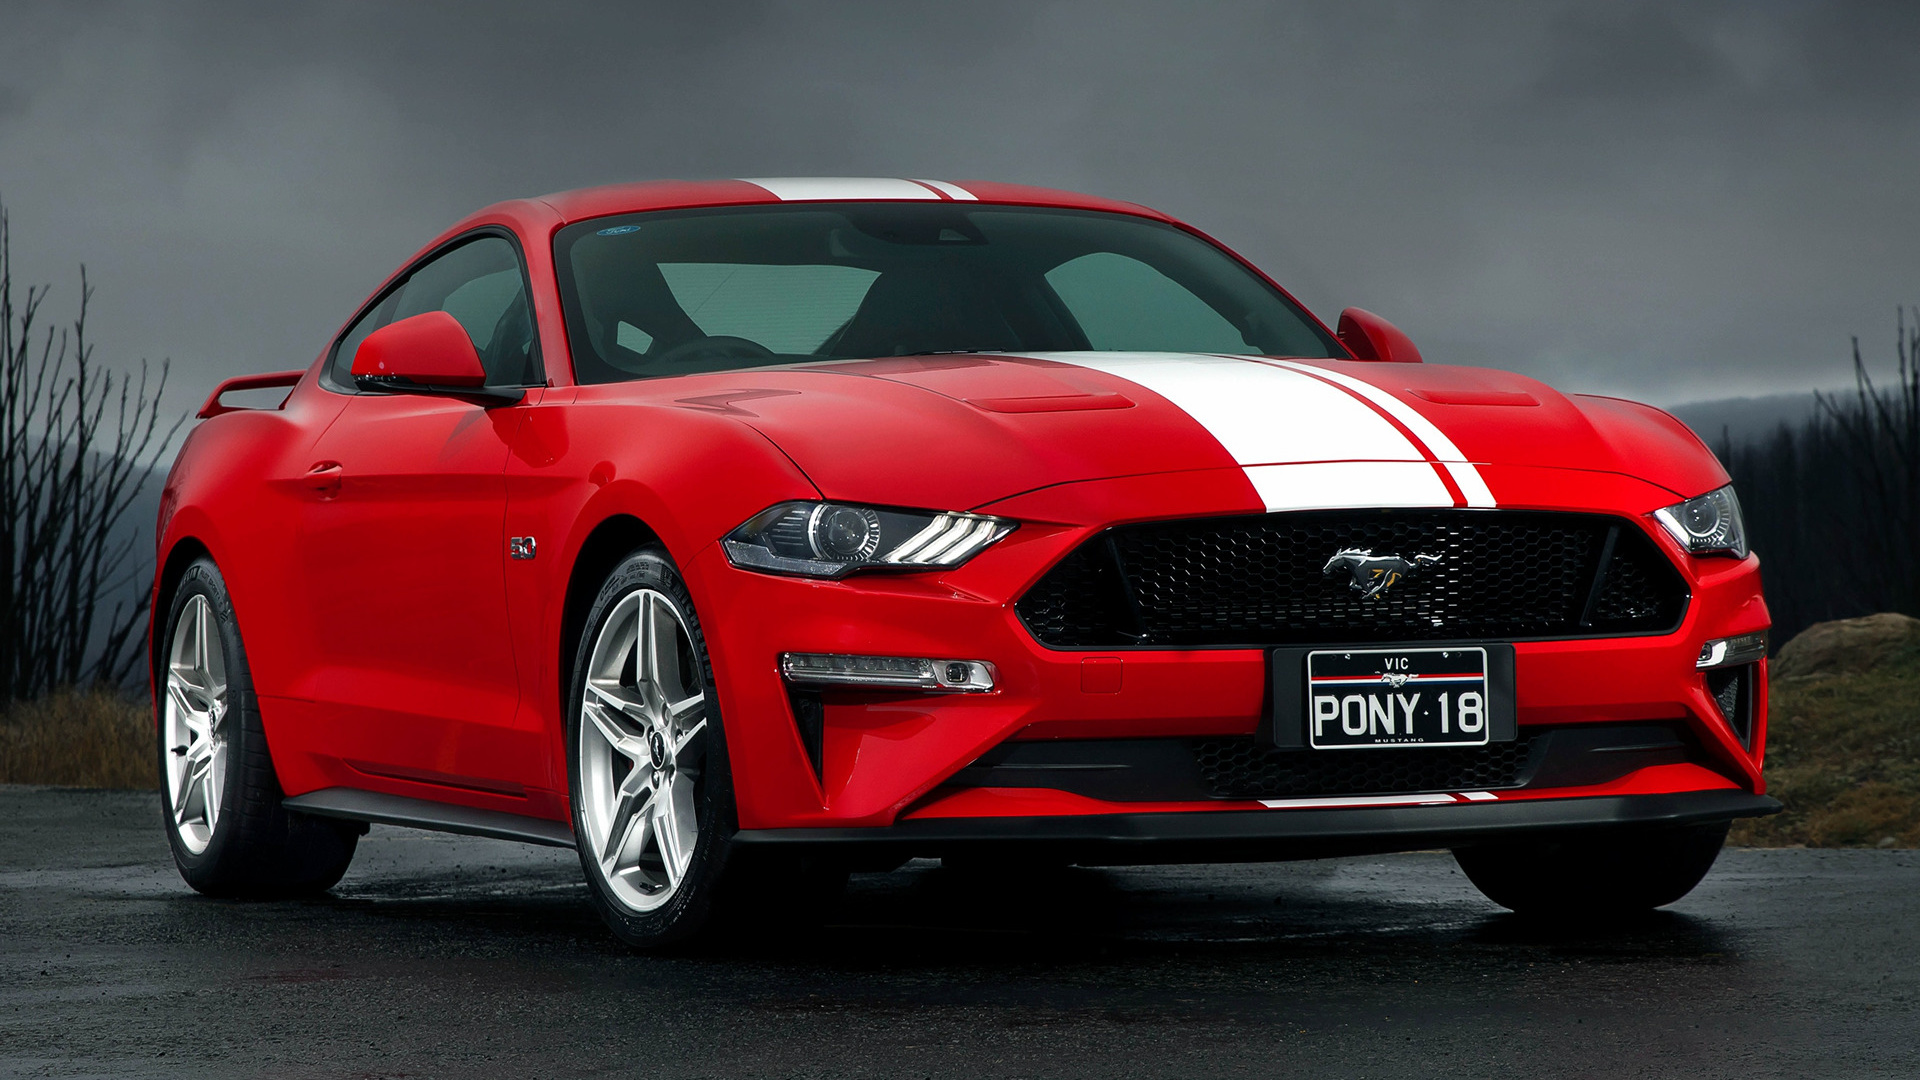 Car Ford Mustang Gt Muscle Car Red Car 1920x1080